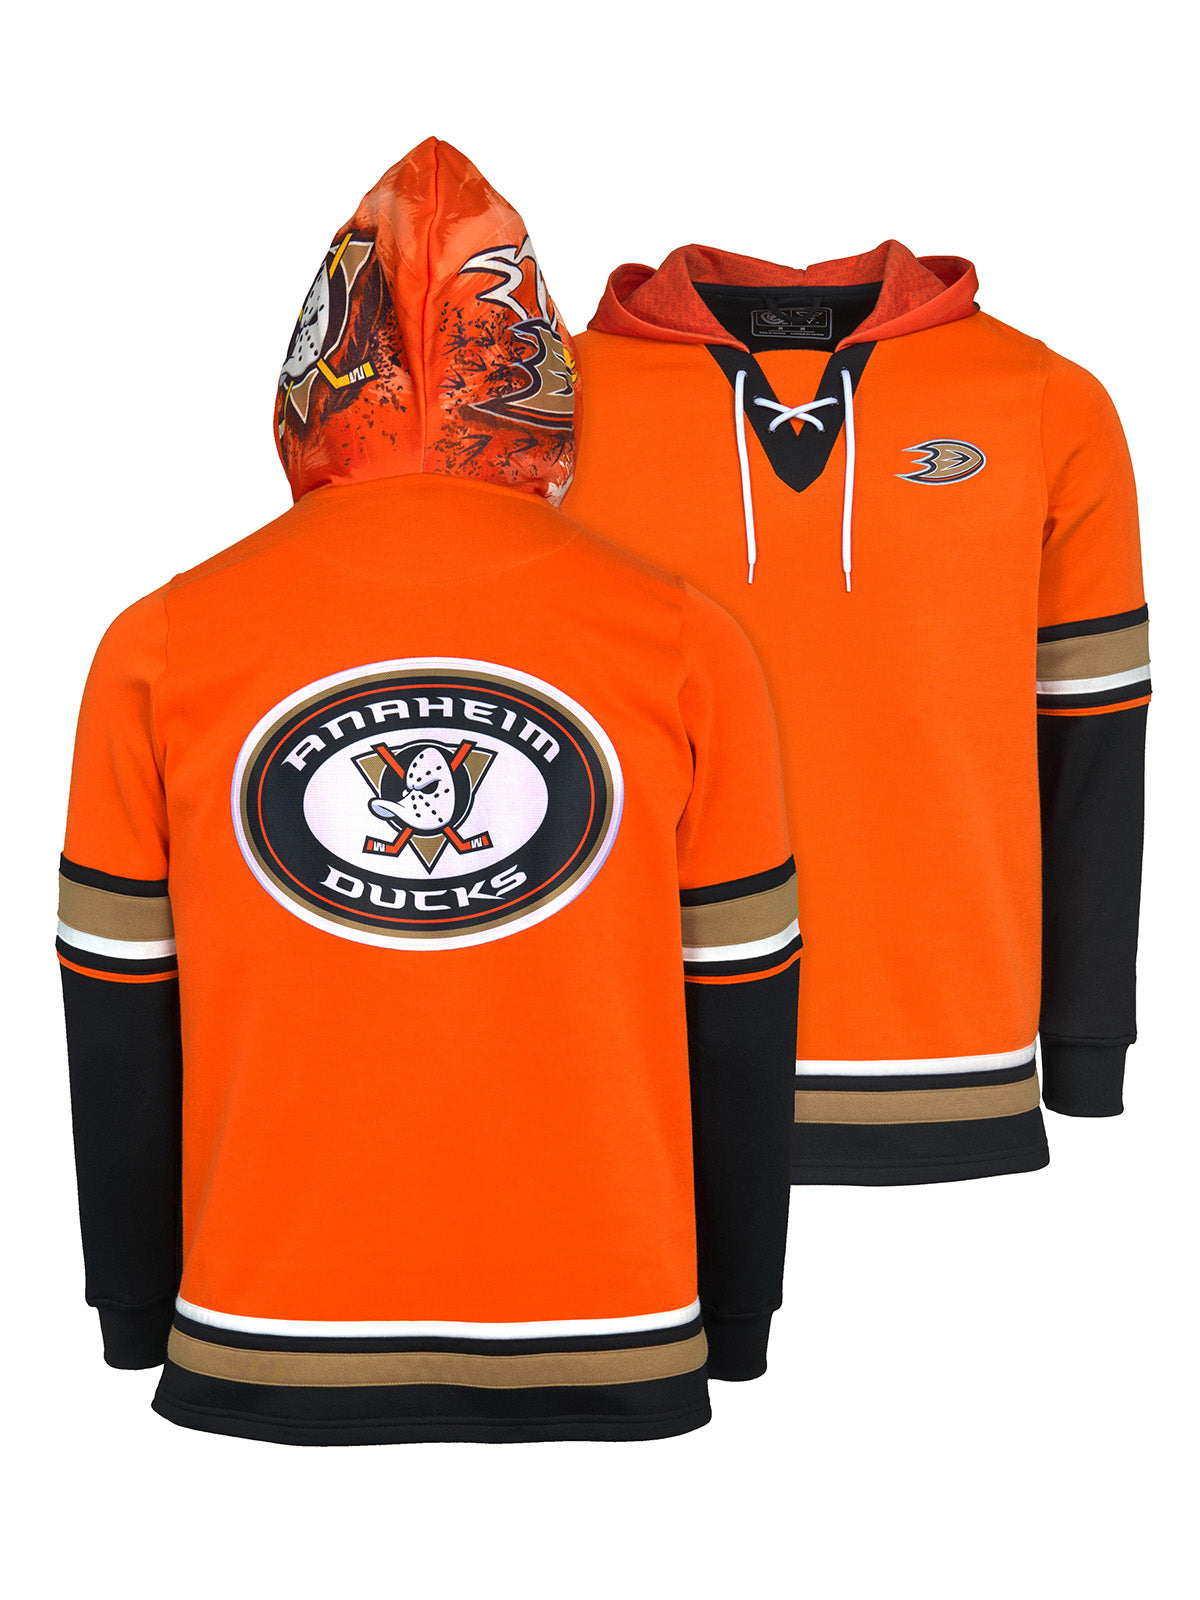 Anaheim Ducks Lace-Up Hoodie - Hand drawn custom hood designs with  all the team colors and craftmanship to replicate the gameday jersey of this NHL hoodie